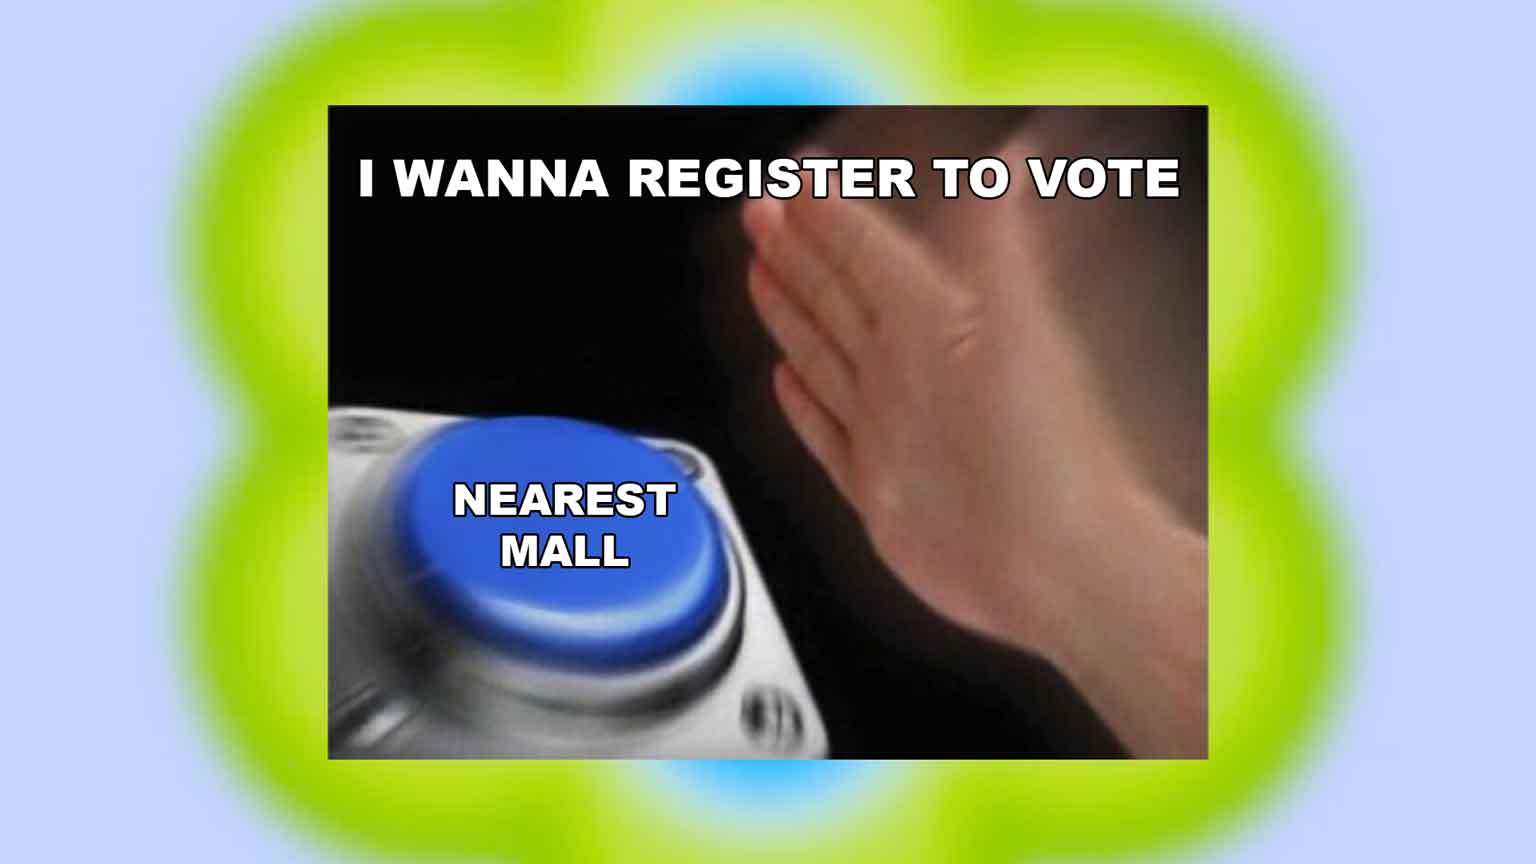 NOT YET REGISTERED TO VOTE? YOU CAN NOW DO THAT AT THE MALL